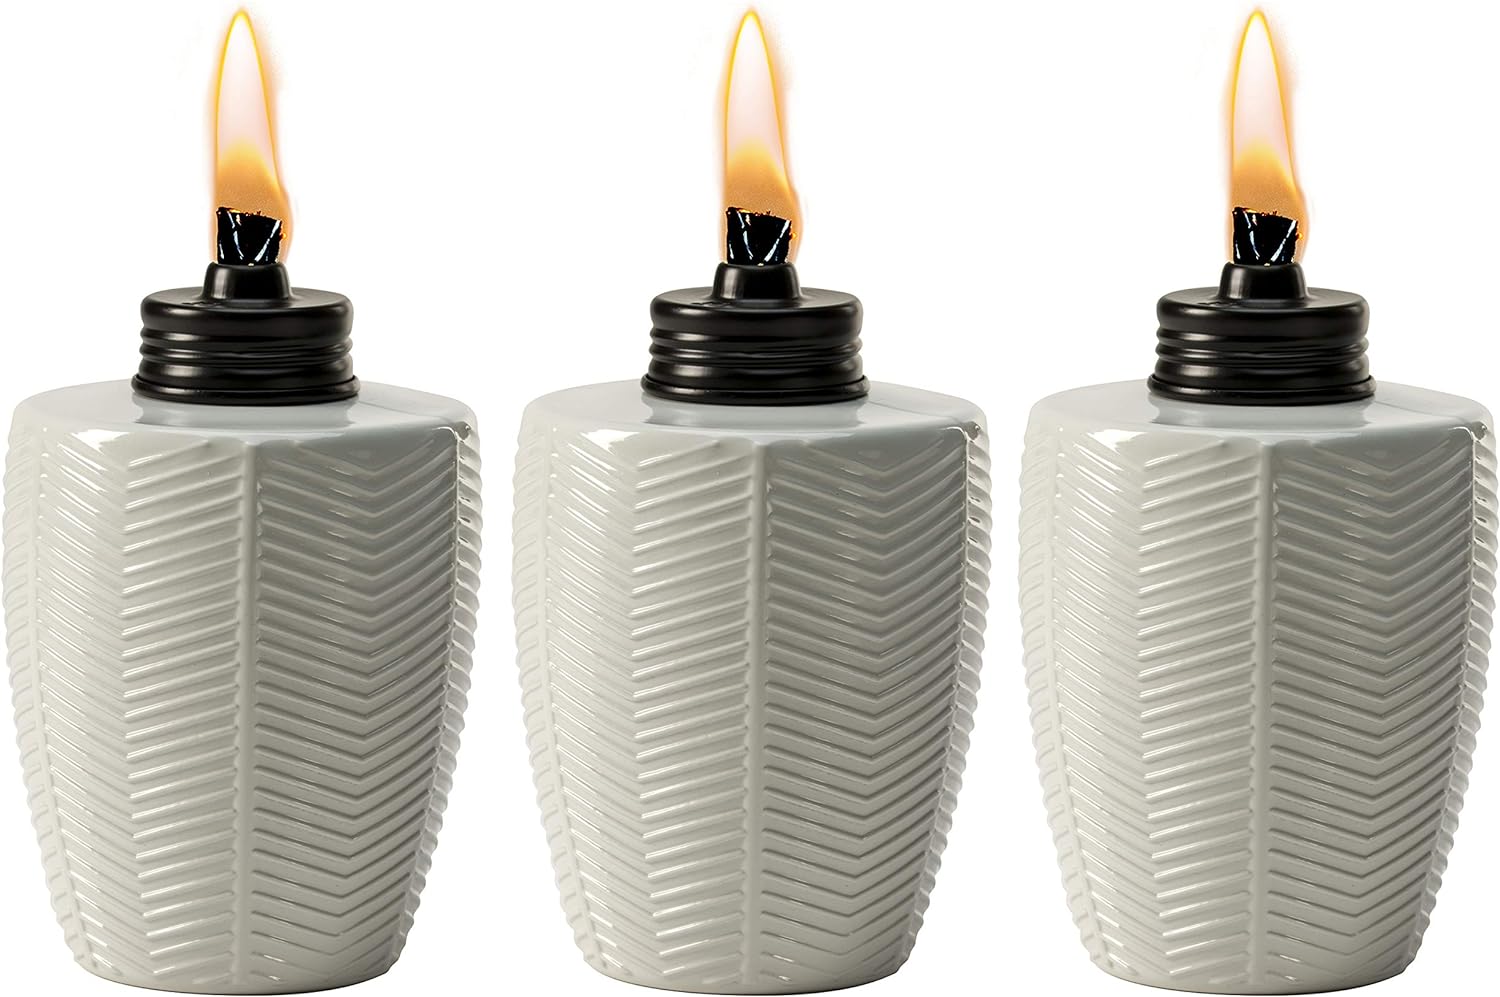 TIKI Brand Table Torch Glass Herringbone Ivory - Decorative Table Top Torches for Outdoor, Patio, Backyard and Garden, 5.75 in, 1118120, White, 3-Pack